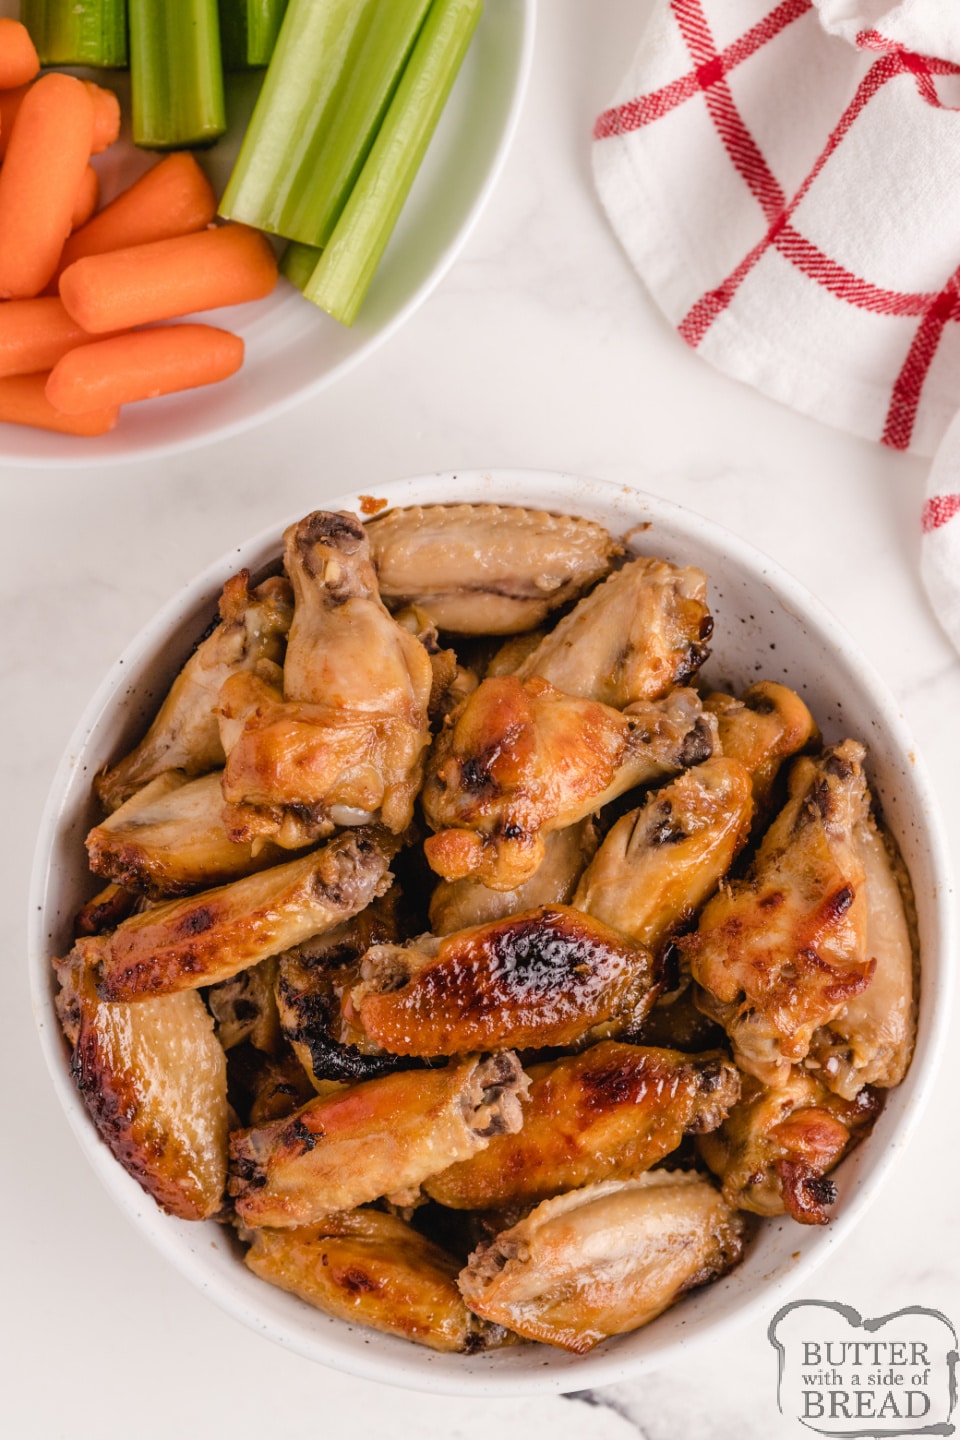 Oven Baked Chicken Wings are perfect for an appetizer, side dish or even the main course. These baked chicken wings are marinated overnight so they are tender, juicy and packed with flavor!